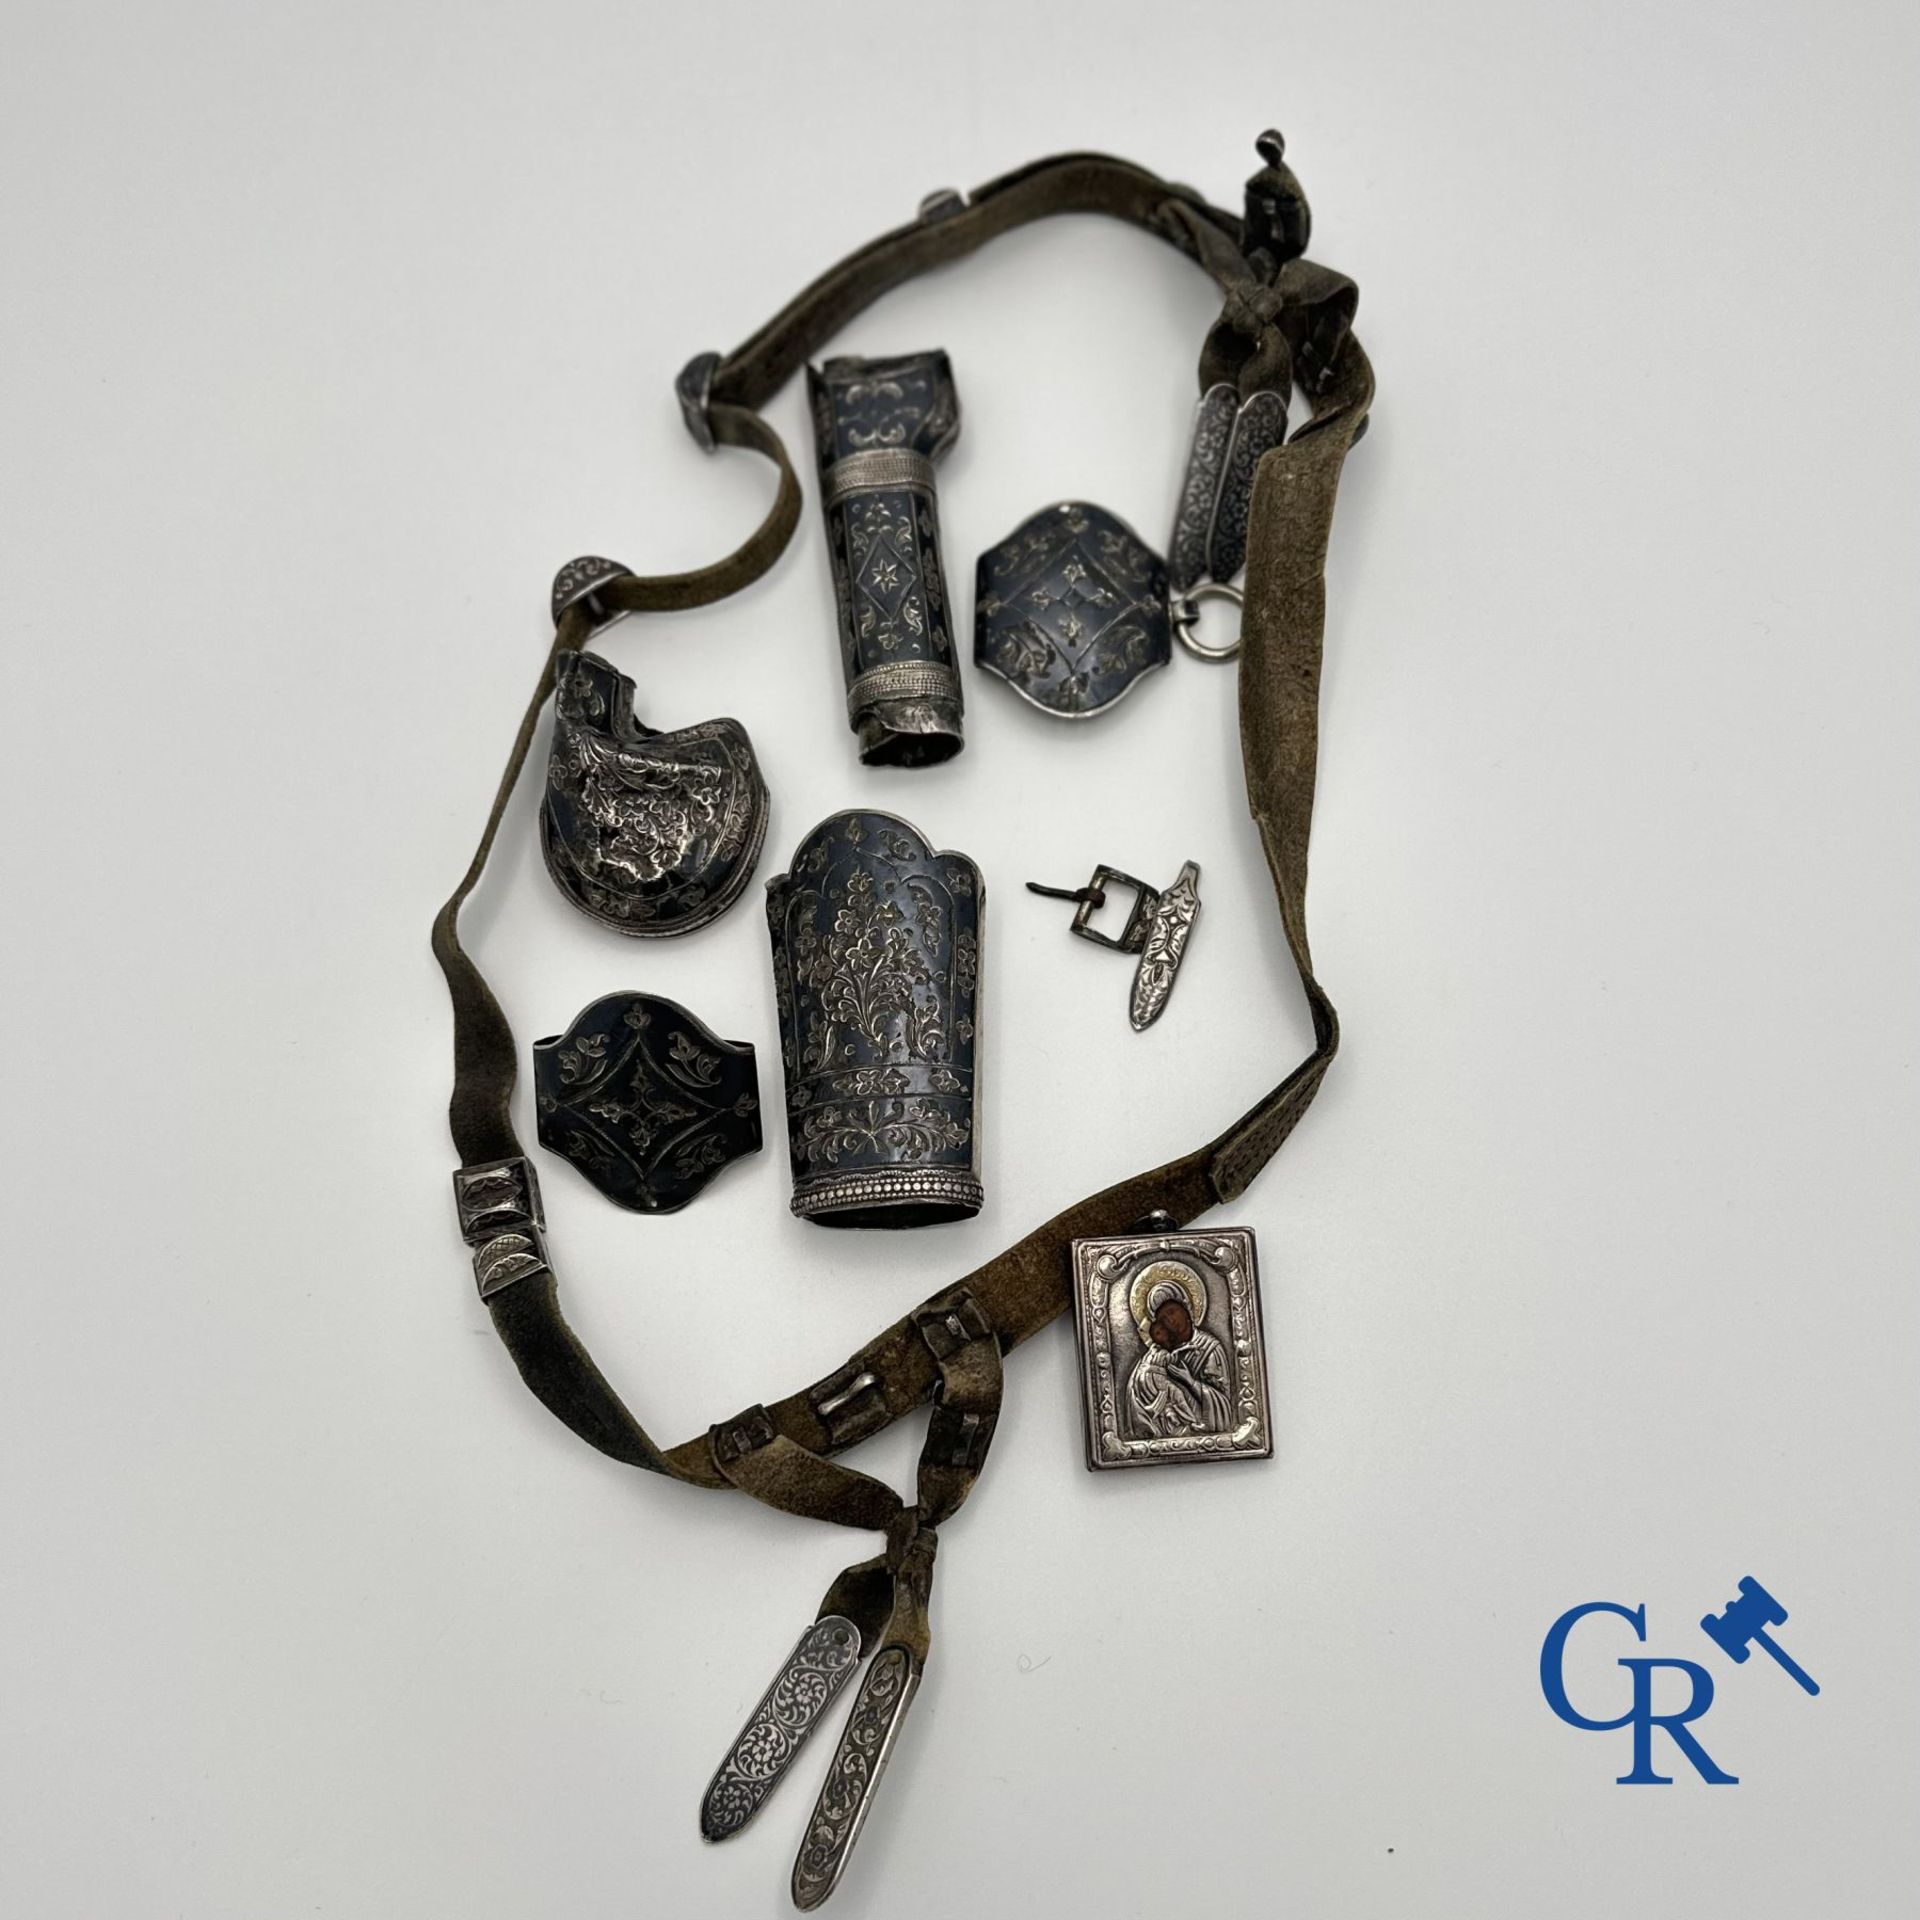 Jewellery-silver: Russian work: Caucasian belt in silver and pendant with icon in silver.